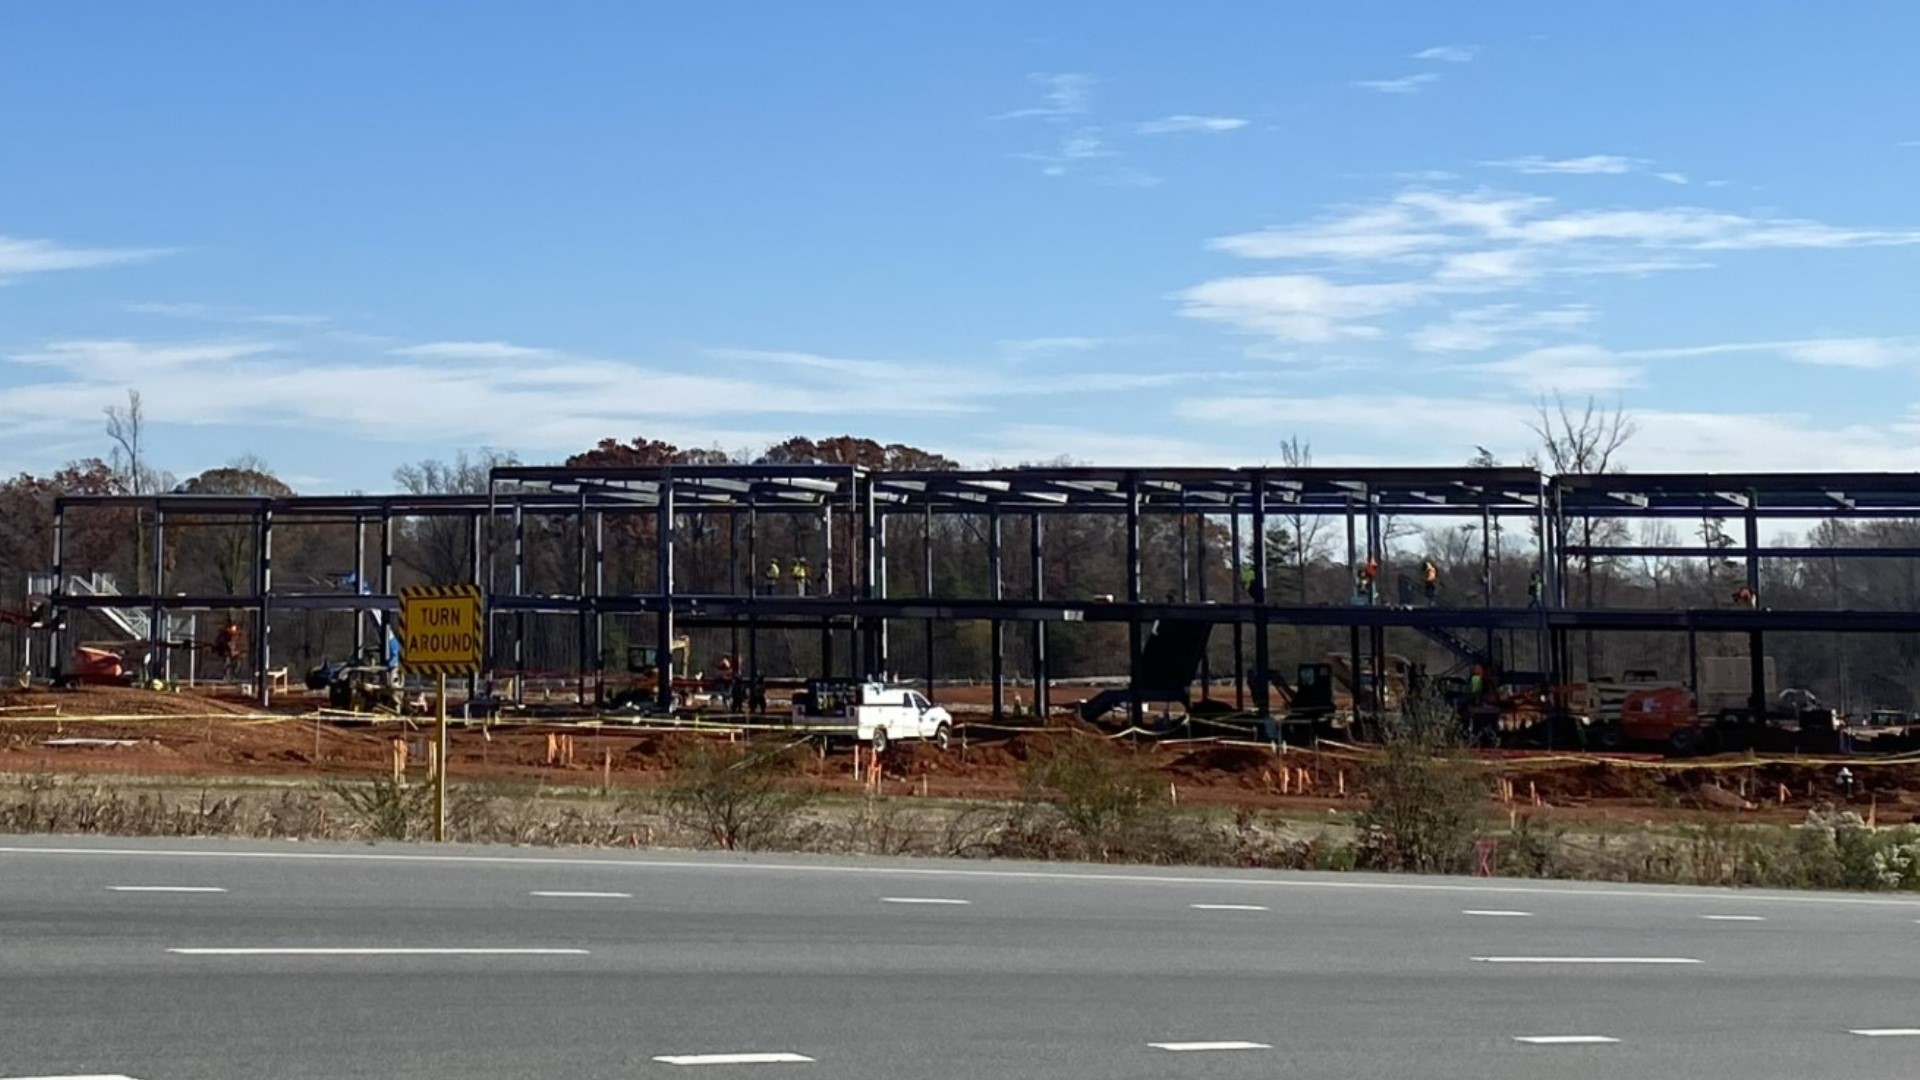 The new Topgolf entertainment complex in Greensboro is taking shape.